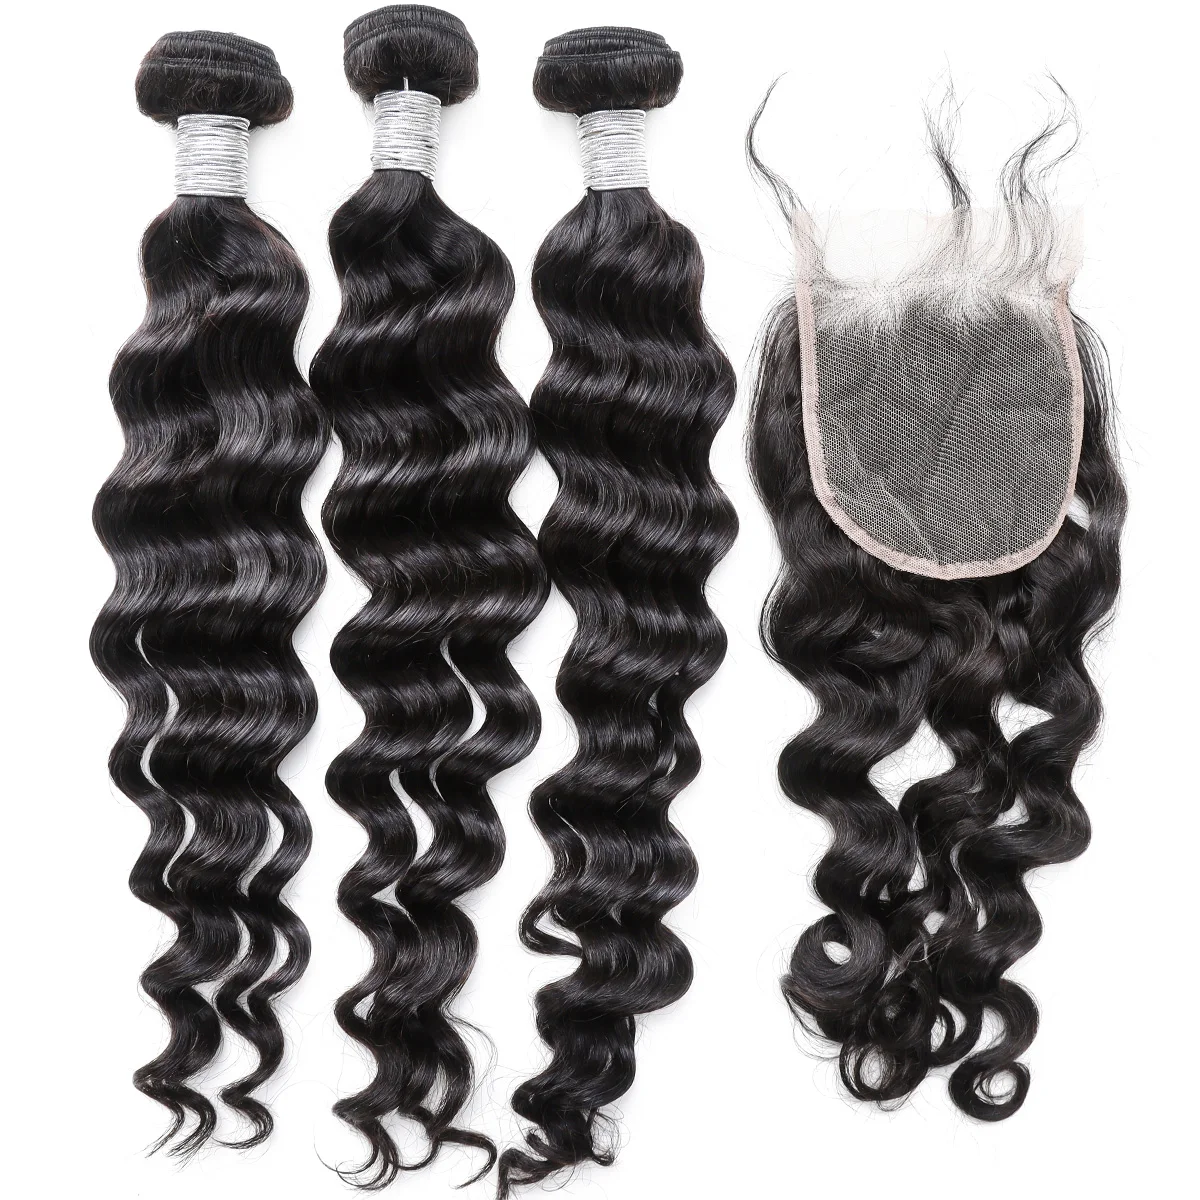 

Spicy Pretty Unprocessed Virgin Human Hair Bundle Set With Swiss Lace Closure On Sell